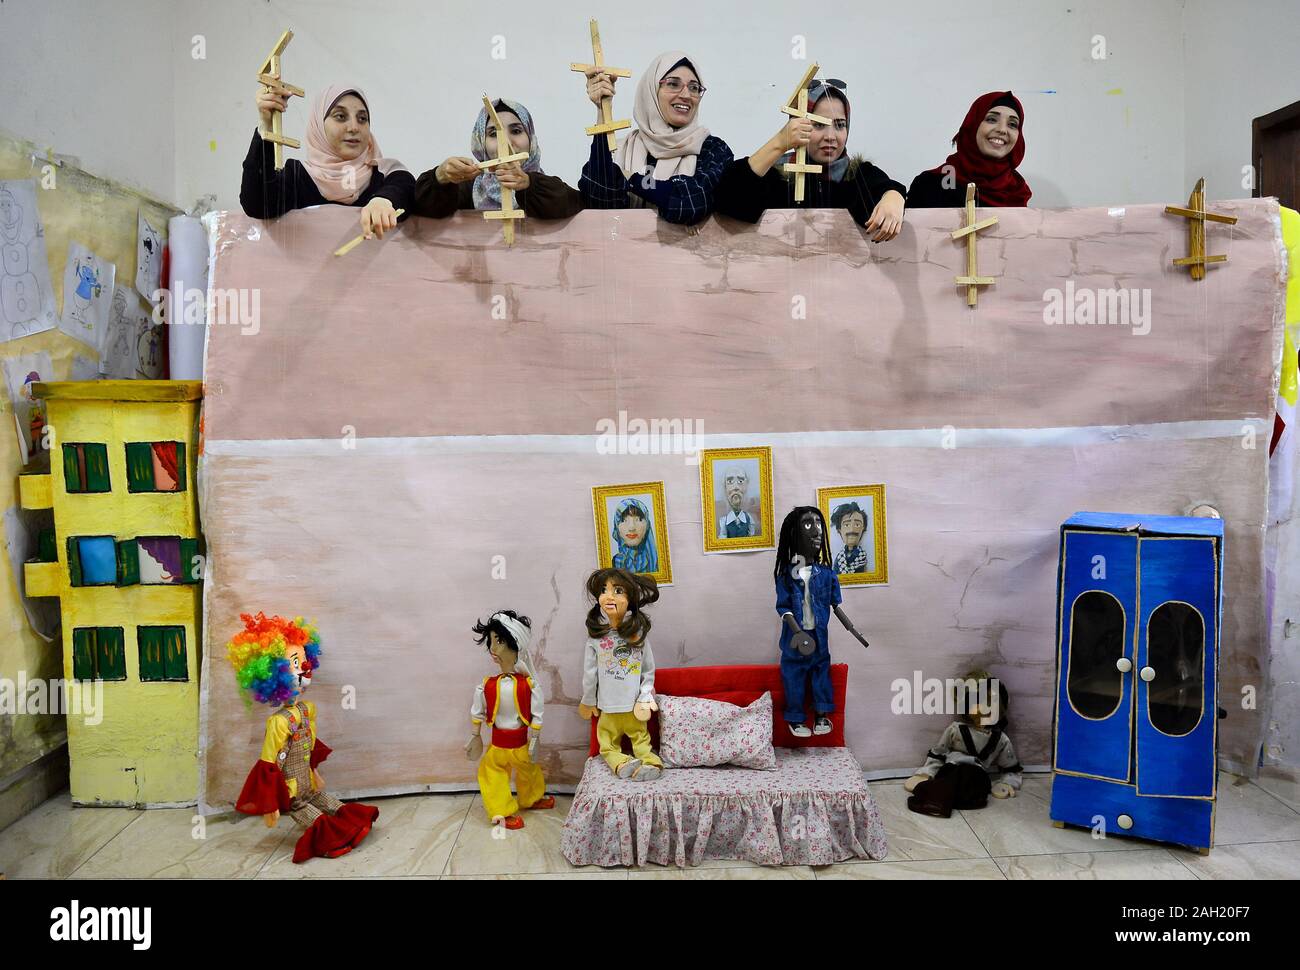 Gaza. 23rd Dec, 2019. Palestinian girls show marionettes at Mahdi Karira's office in Gaza City, on Dec. 23, 2019. Mahdi Karira, a 39-year-old master at making the marionette, spent 6 months on training a group of 8 girls and 2 young men to make puppets and perform puppet theater shows for children, in an attempt to promote the art of puppet theater in the Gaza Strip. Credit: Rizek Abdeljawad/Xinhua/Alamy Live News Stock Photo